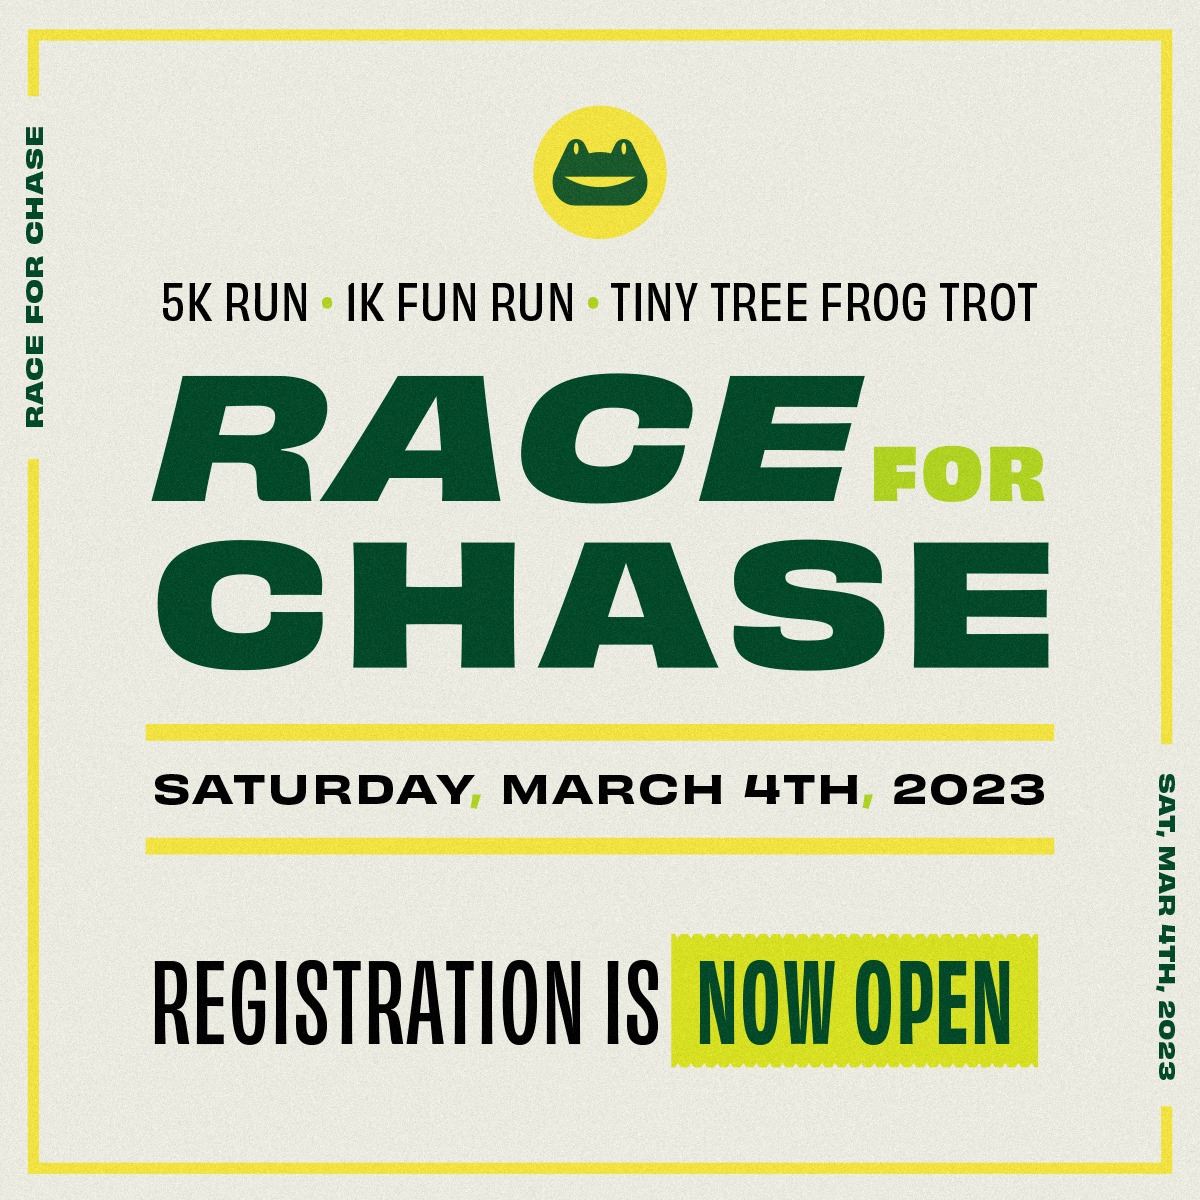  Race for Chase 5k promo image